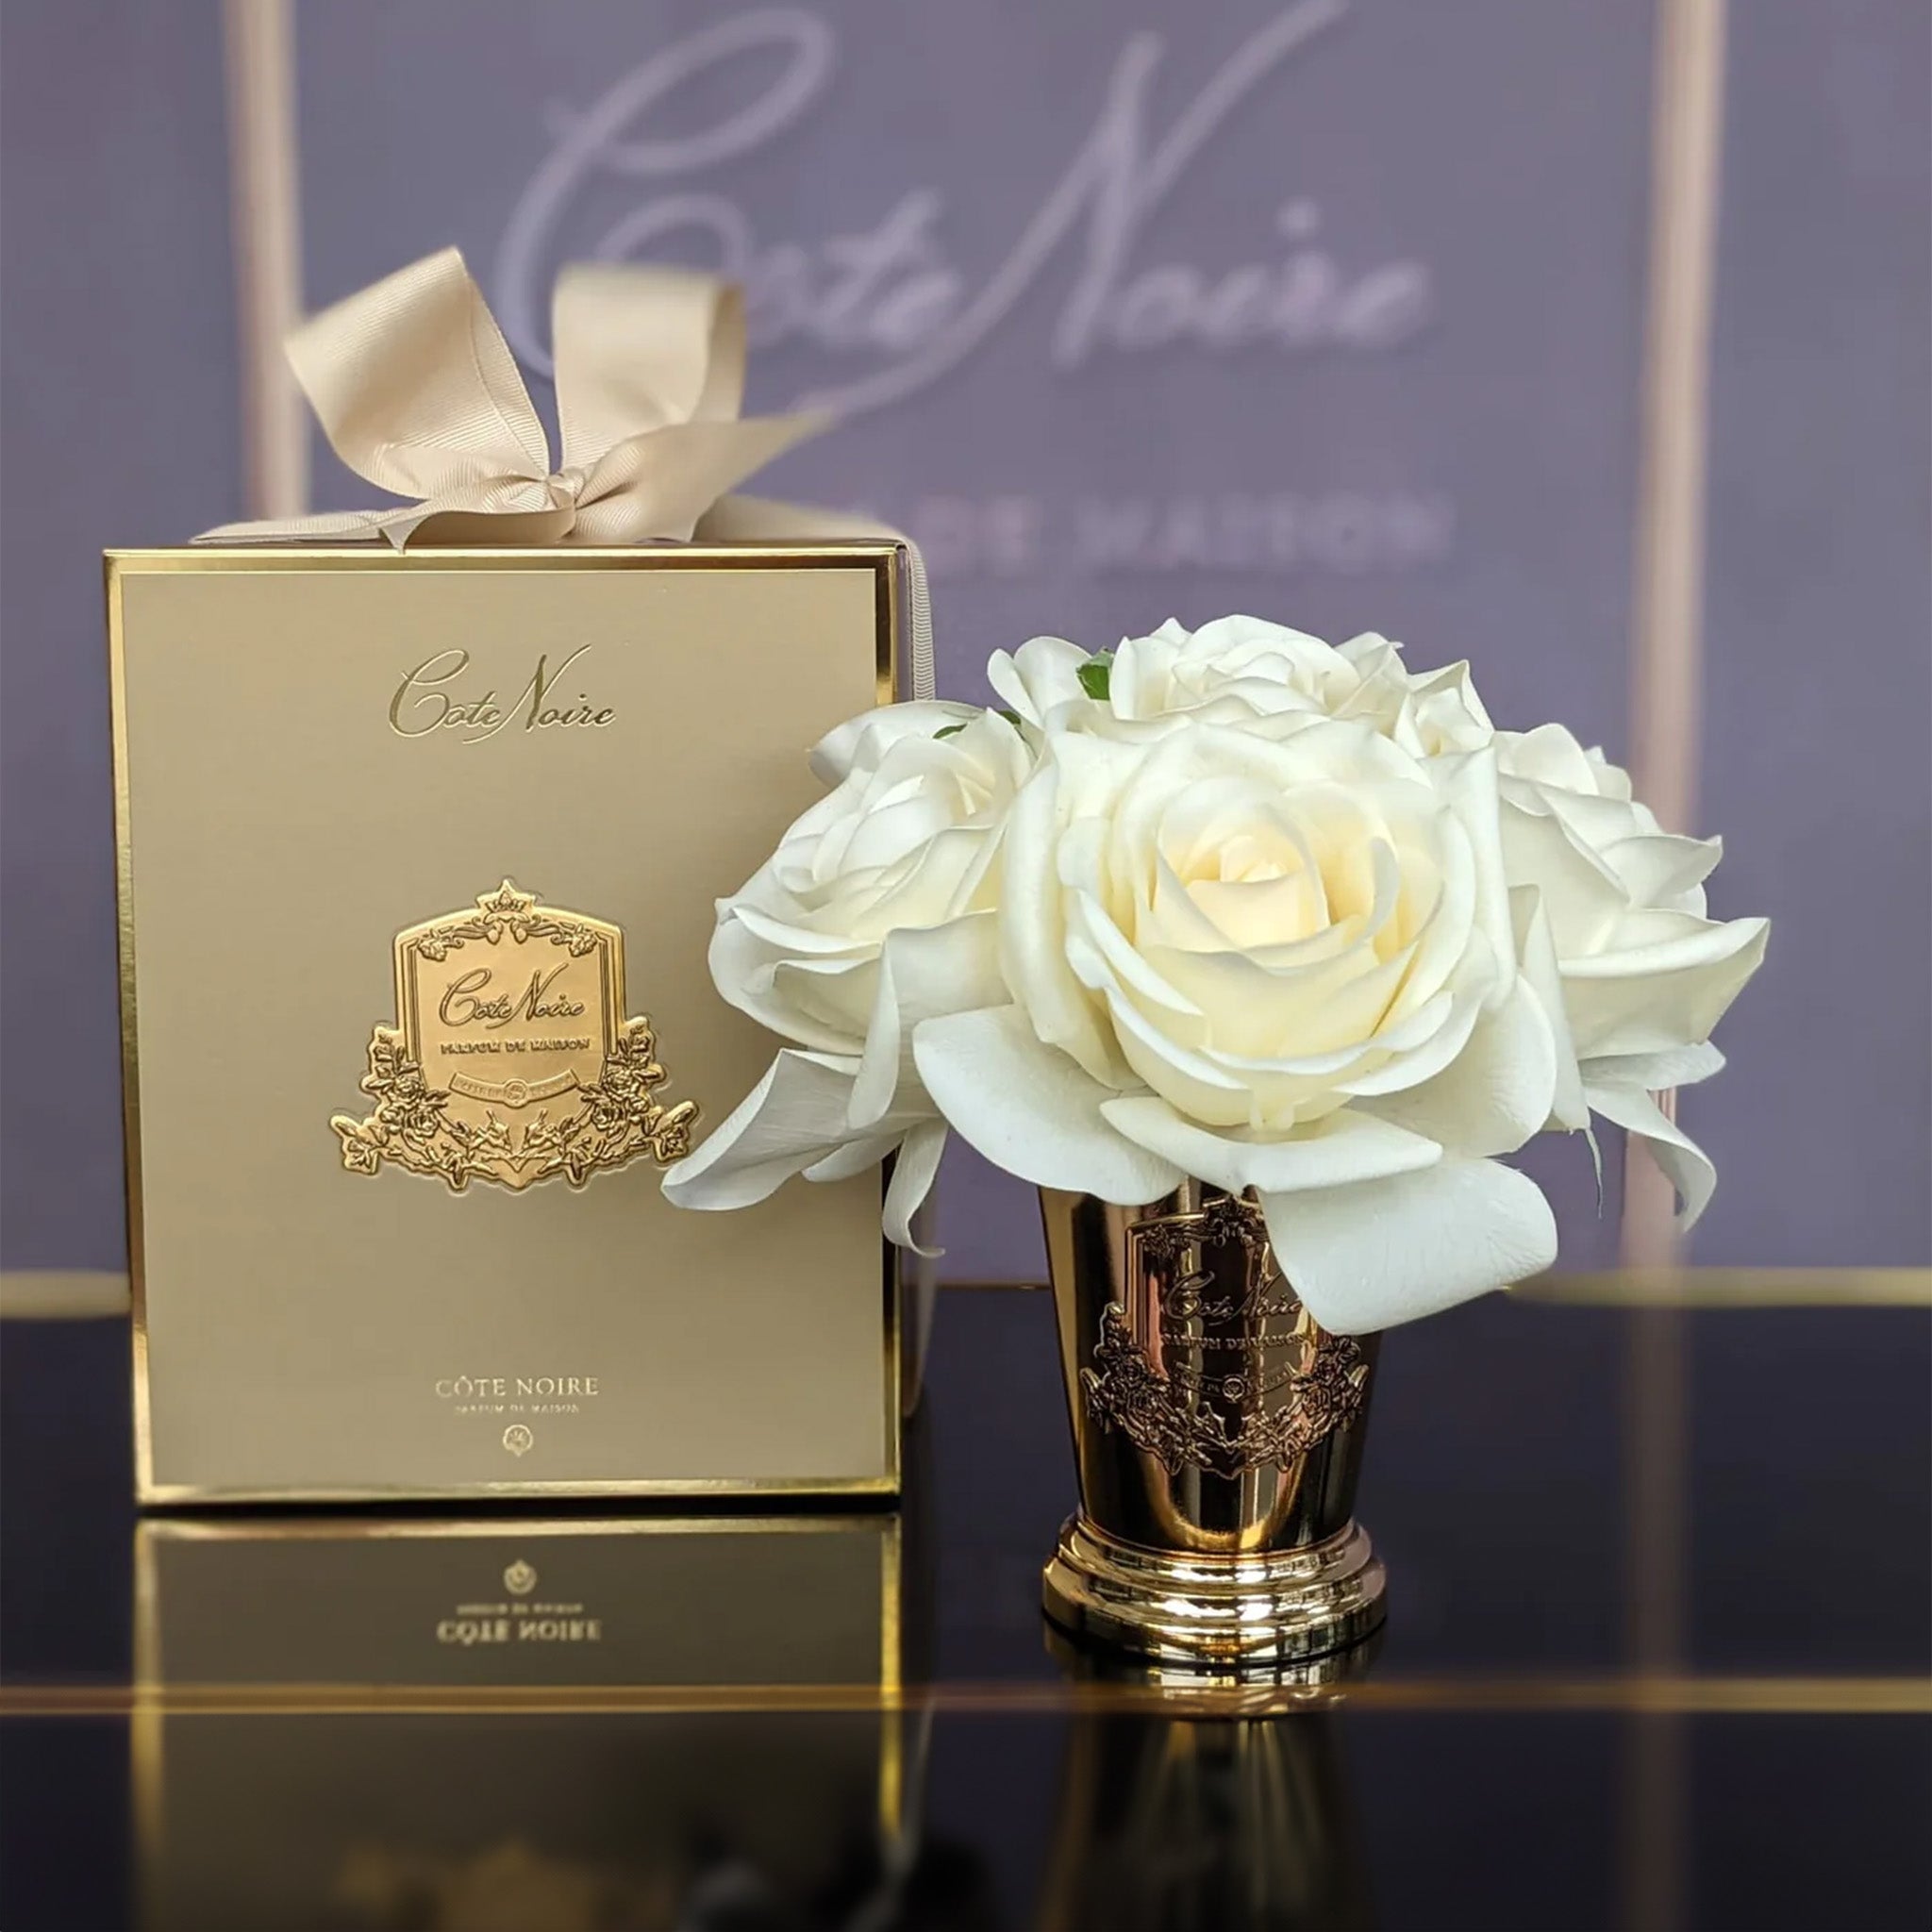 a white rose bouquet in a gold vase next to a gold box by cote noire